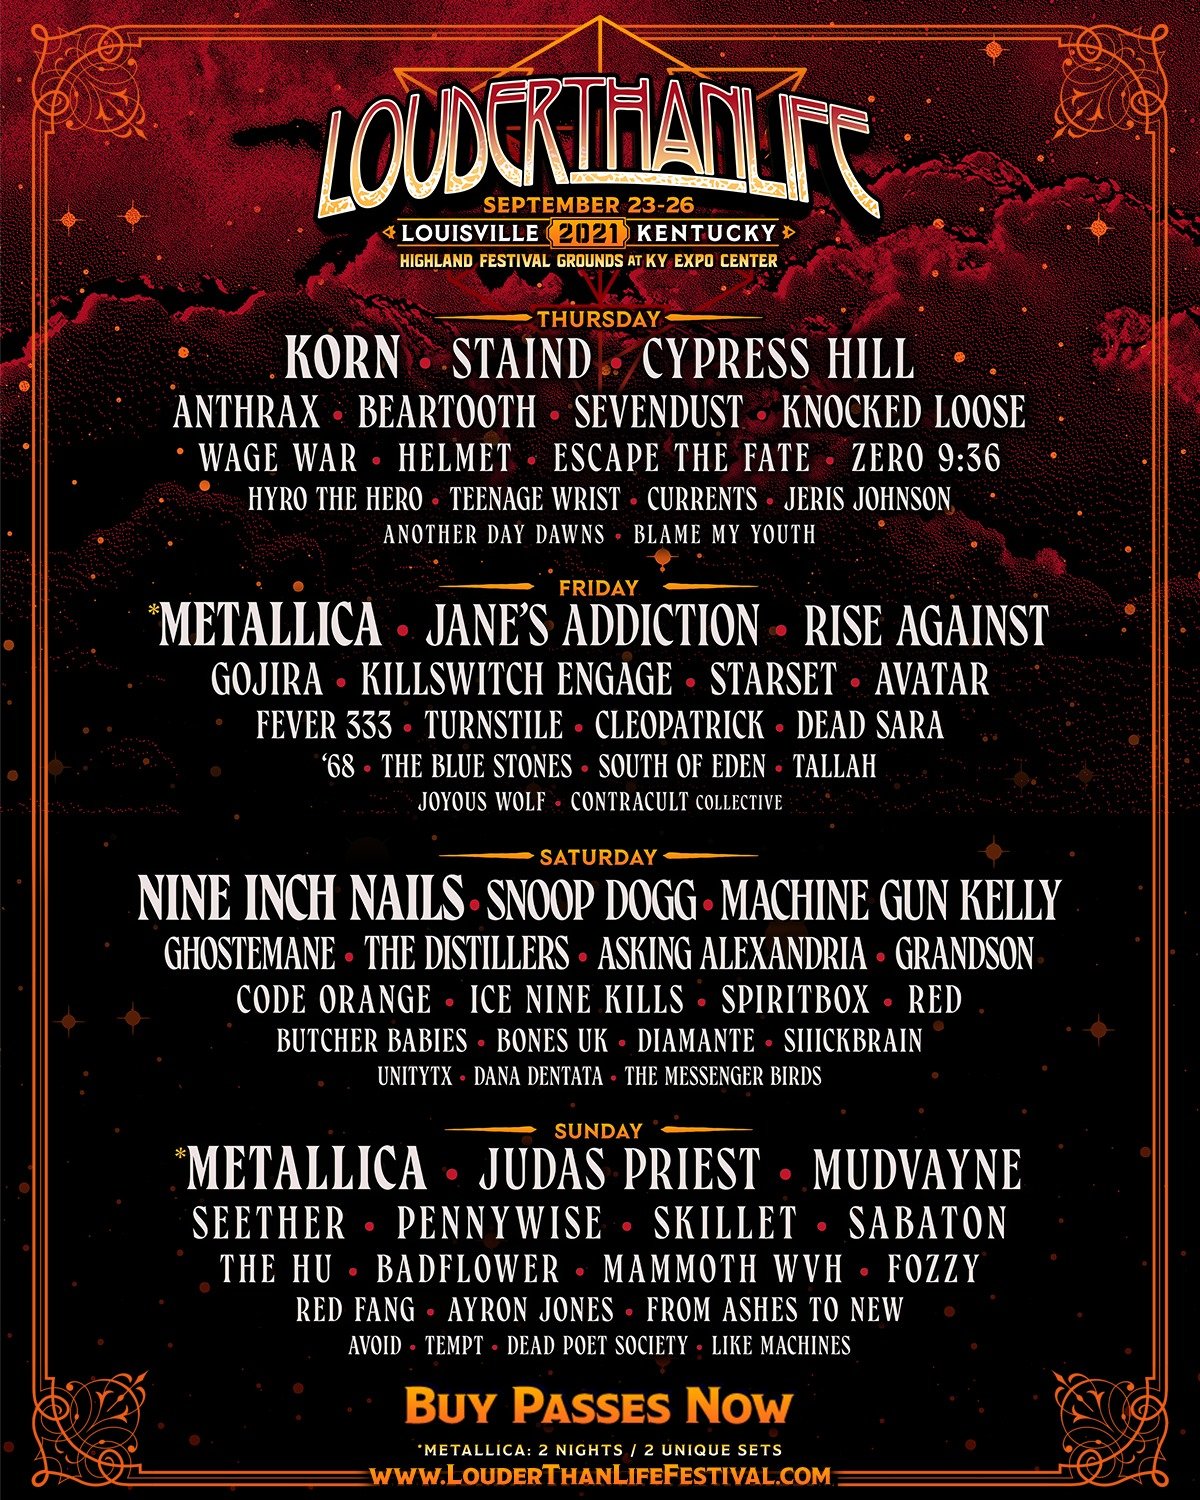 Louder Than Life Festival (US) announced featuring Metallica, Nine Inch